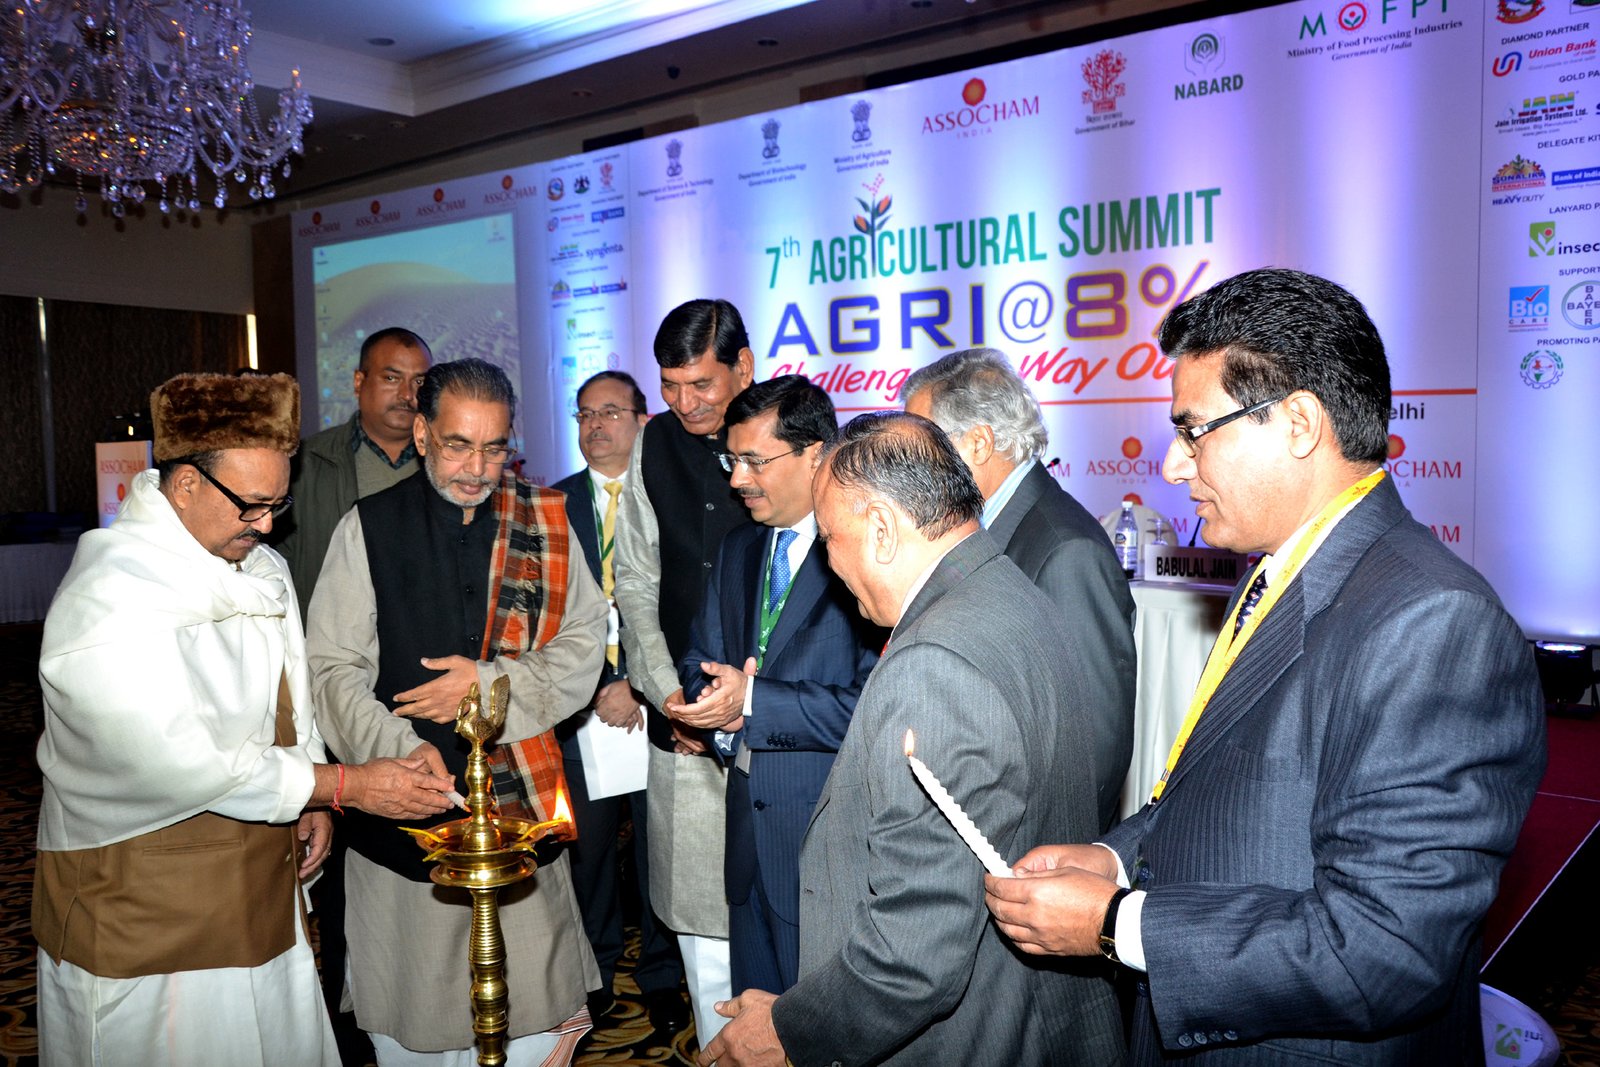 The Union Minister for Agriculture, Shri Radha Mohan Singh lighting the lamp at the 7th Agricultural Summit, in New Delhi on January 15, 2015.